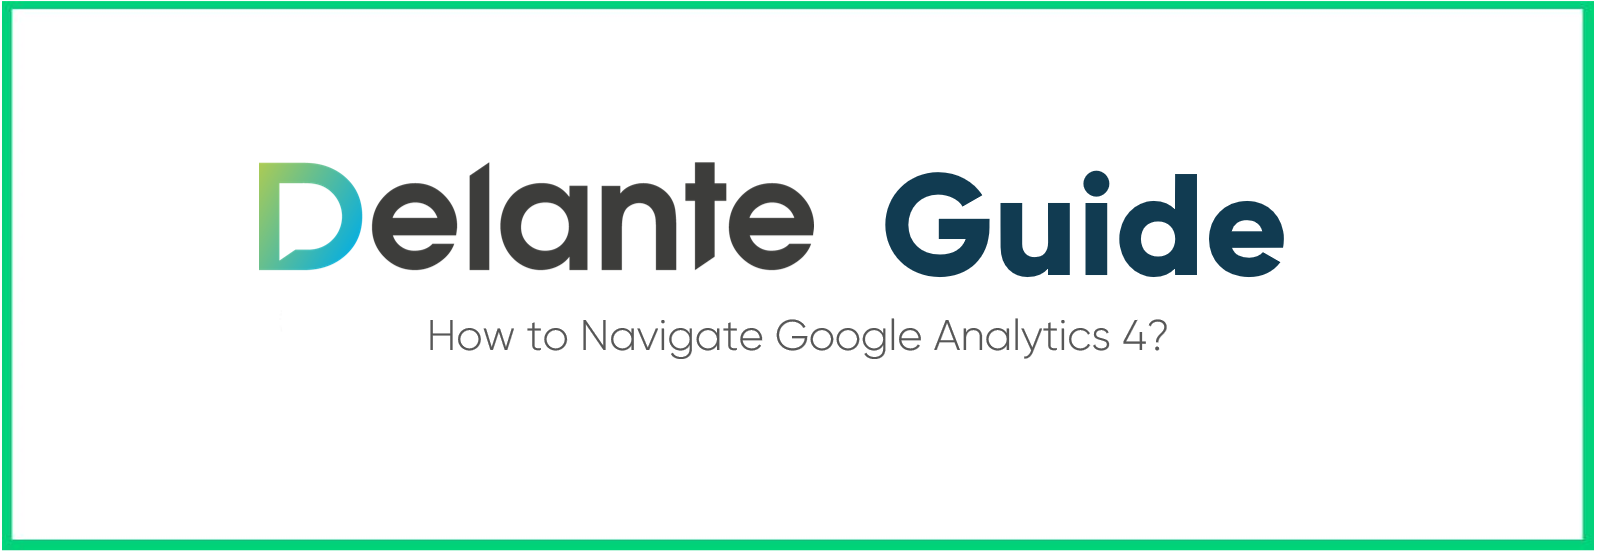 How to Navigate Google Analytics 4? A Step-By-Step GA4 Guide. Part II